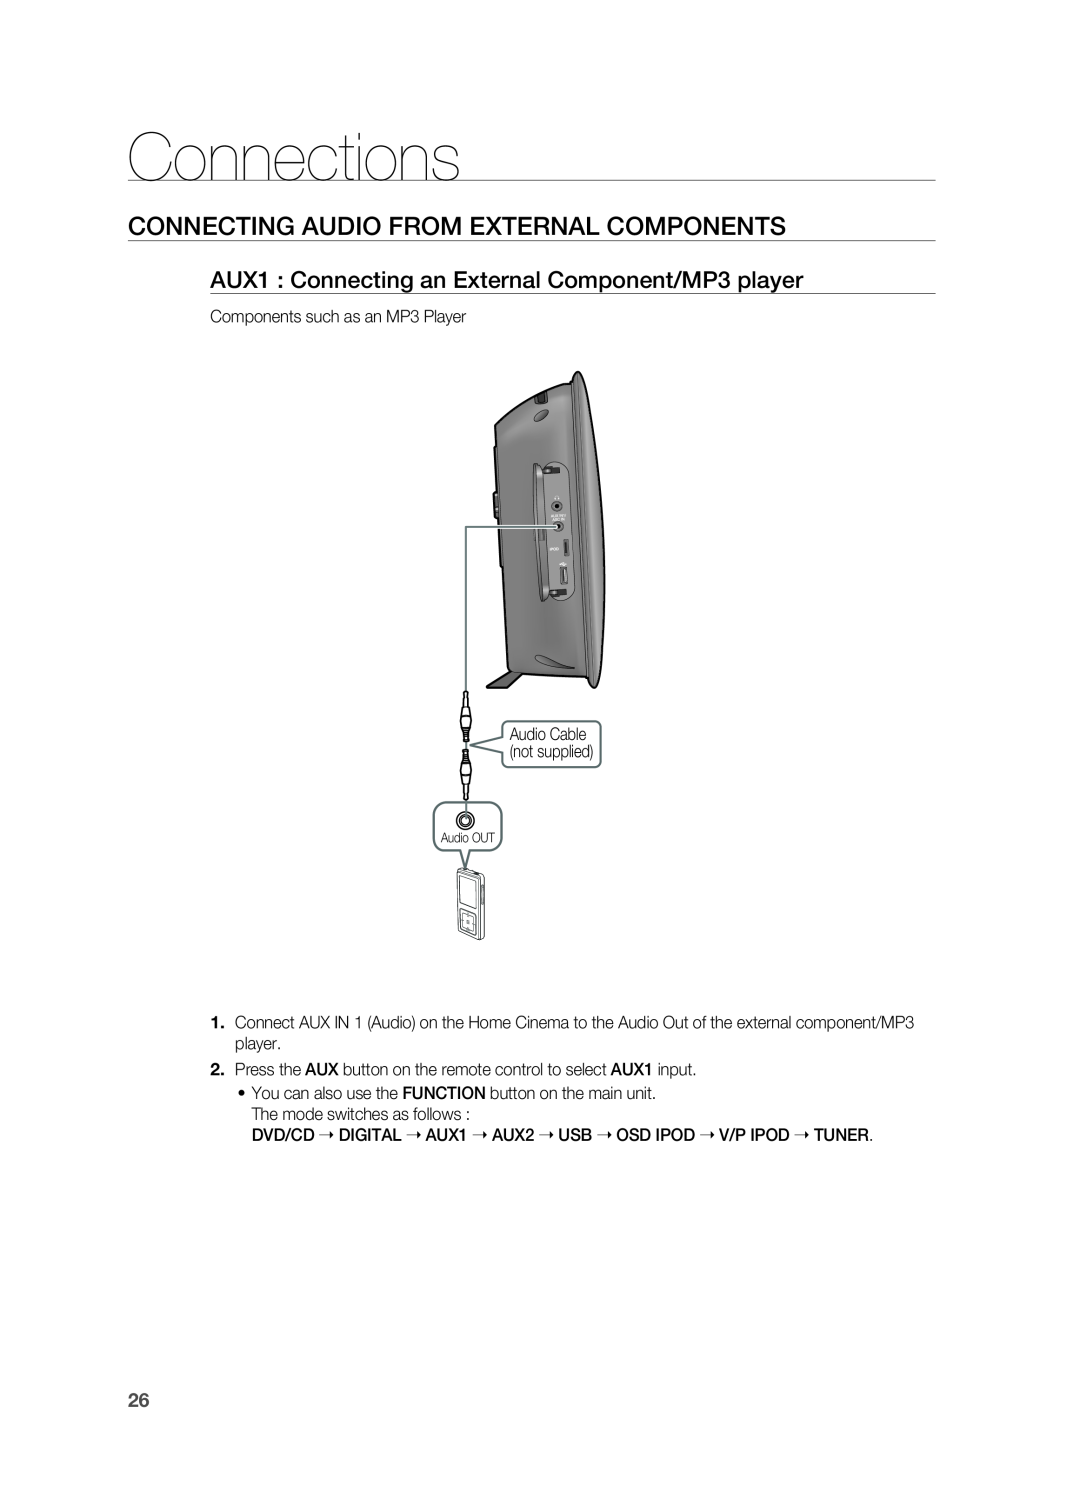 Samsung HT-TX725G, HT-X725G user manual Connecting Audio from External Components, Connections 